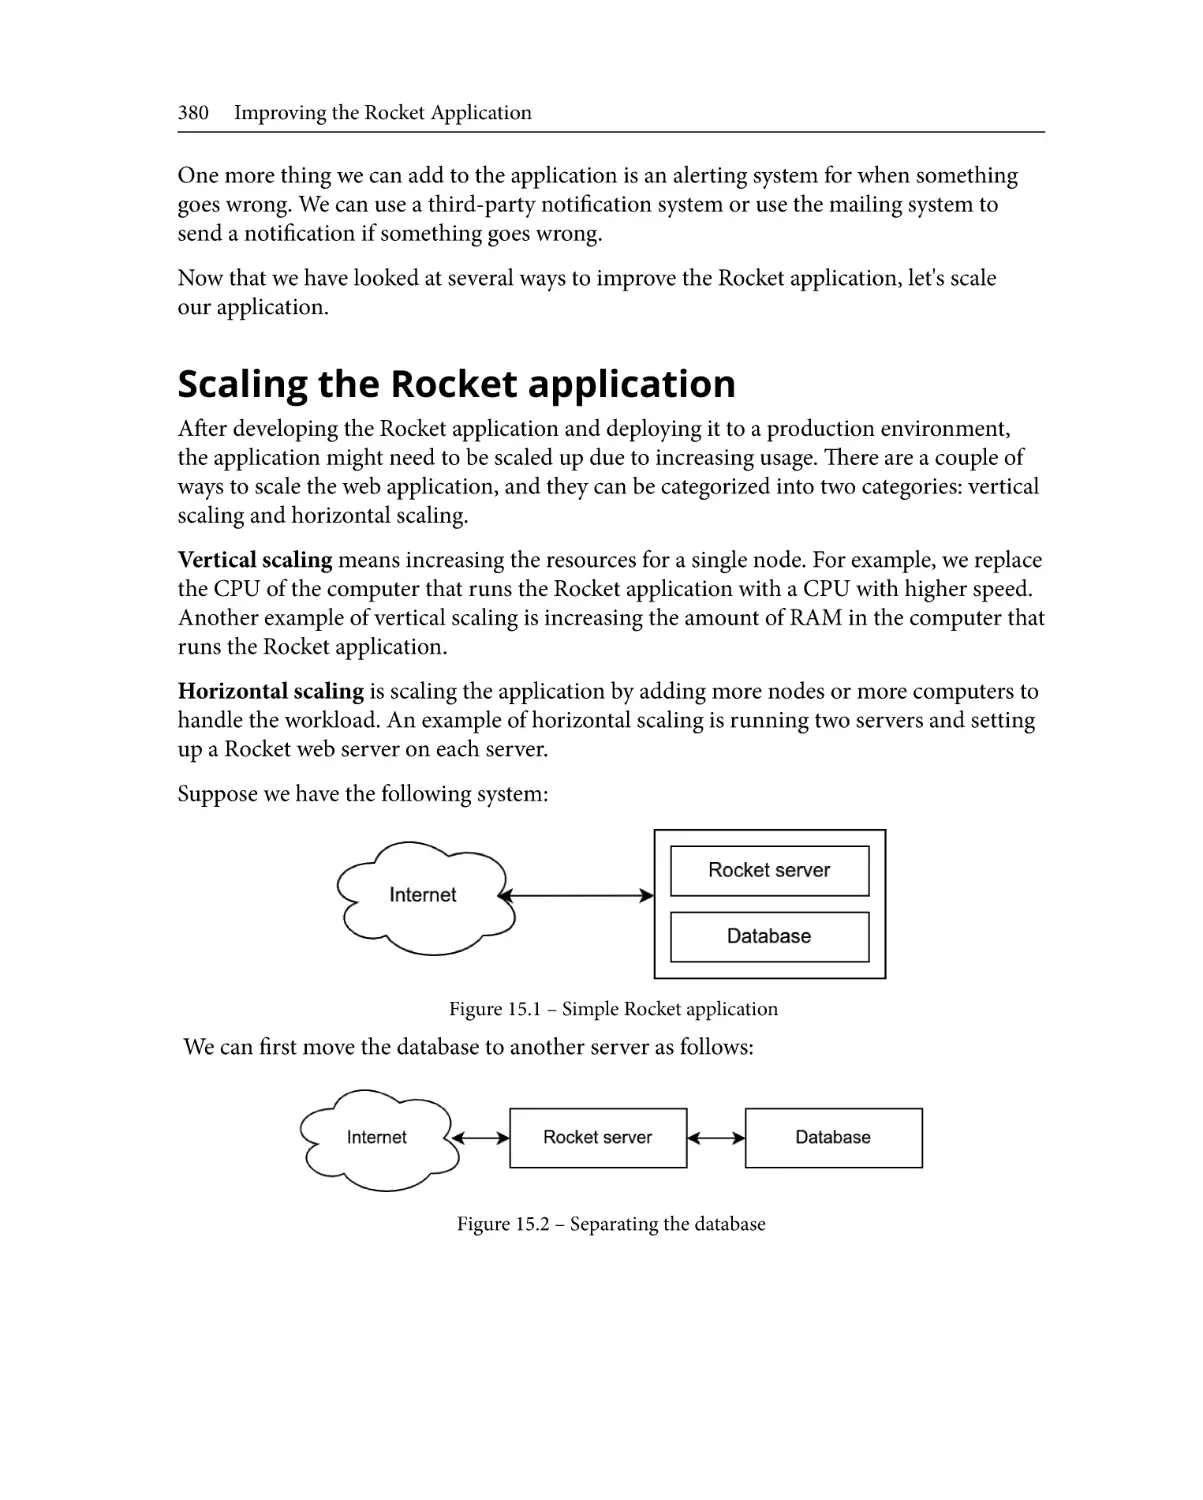 Scaling the Rocket application